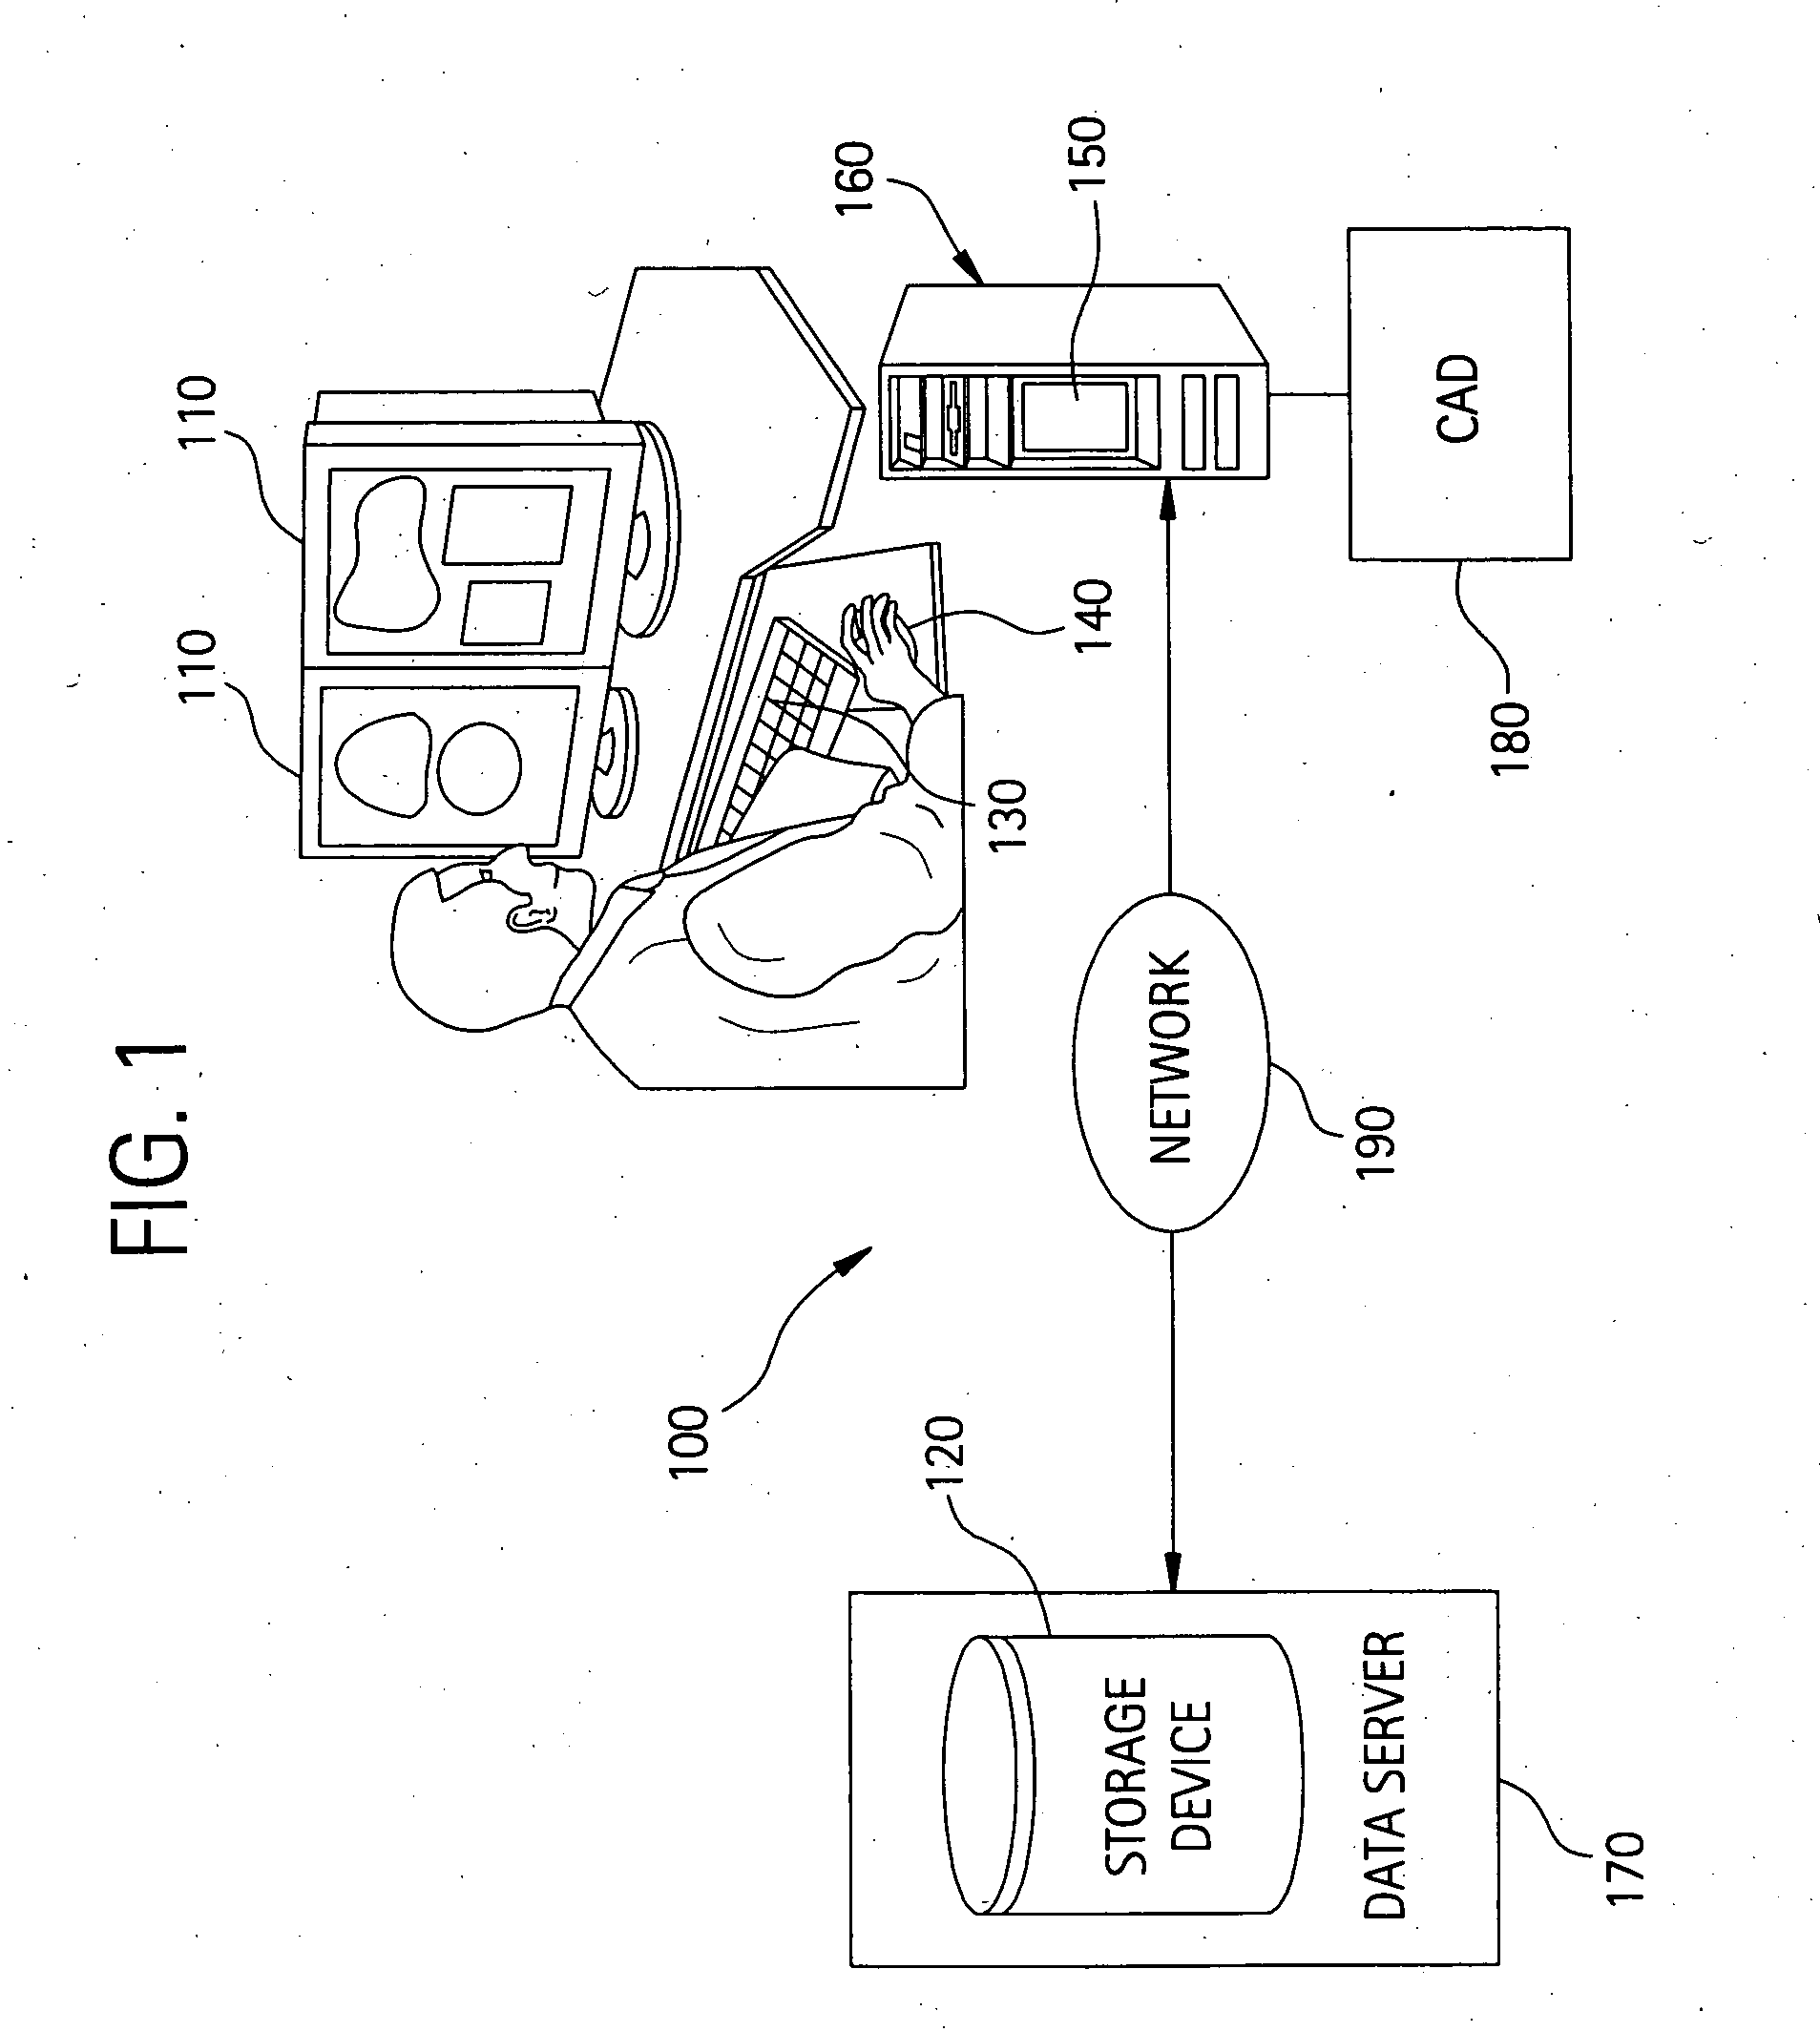 Method and system for displaying regions of pathological interest